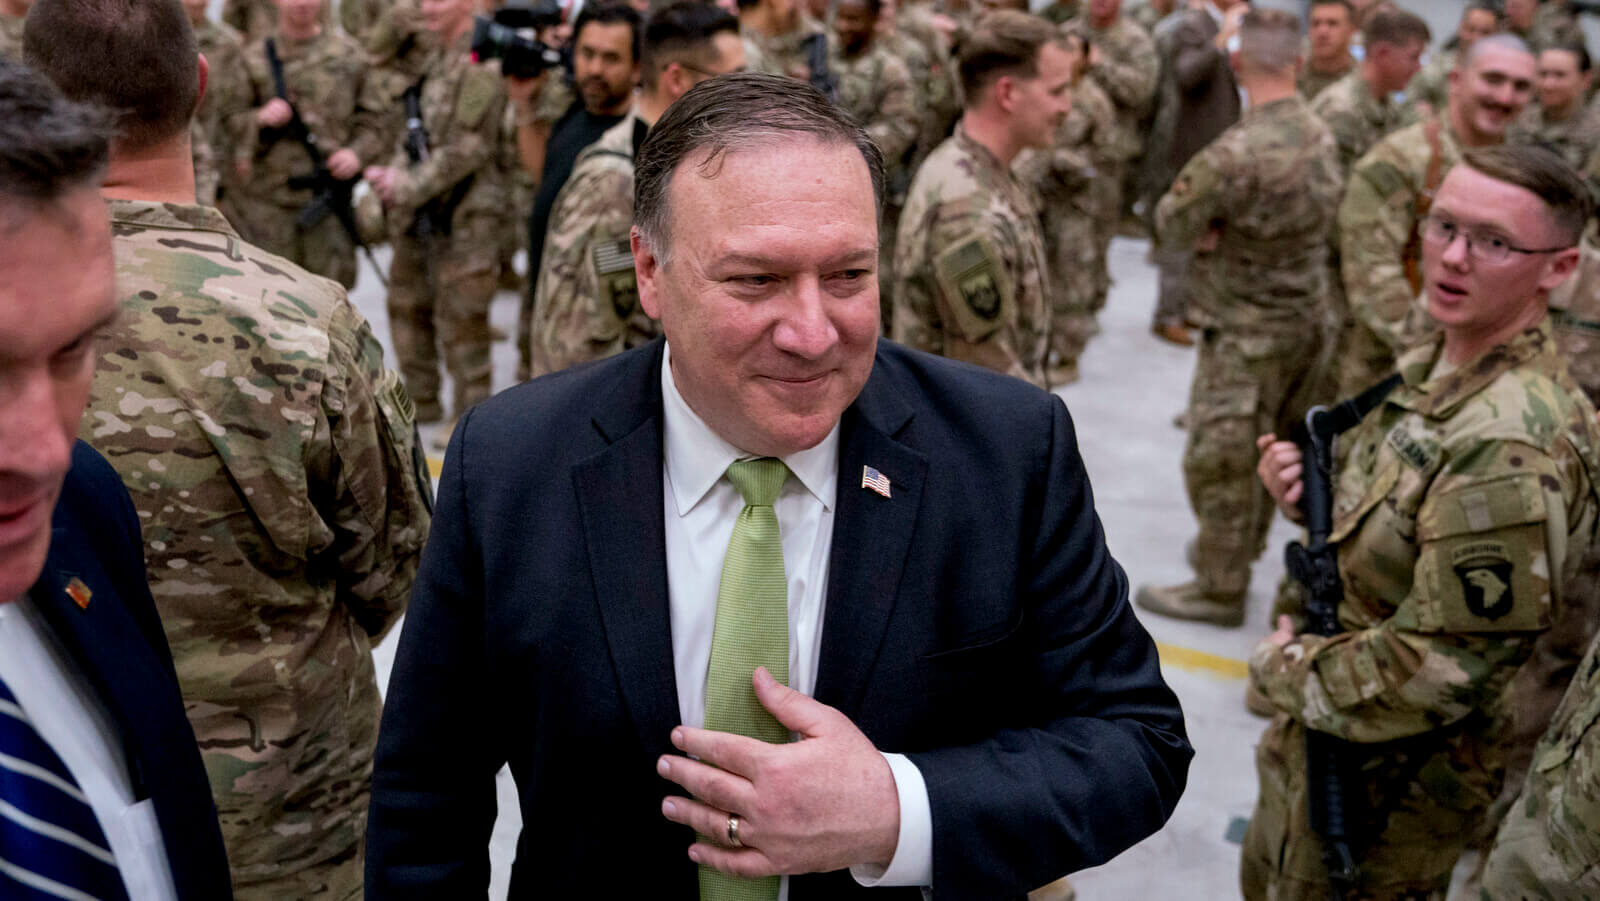 Secretary of State Mike Pompeo meets with coalition forces at Bagram Air Base, Afghanistan, July 9, 2018. Andrew Harnik | AP